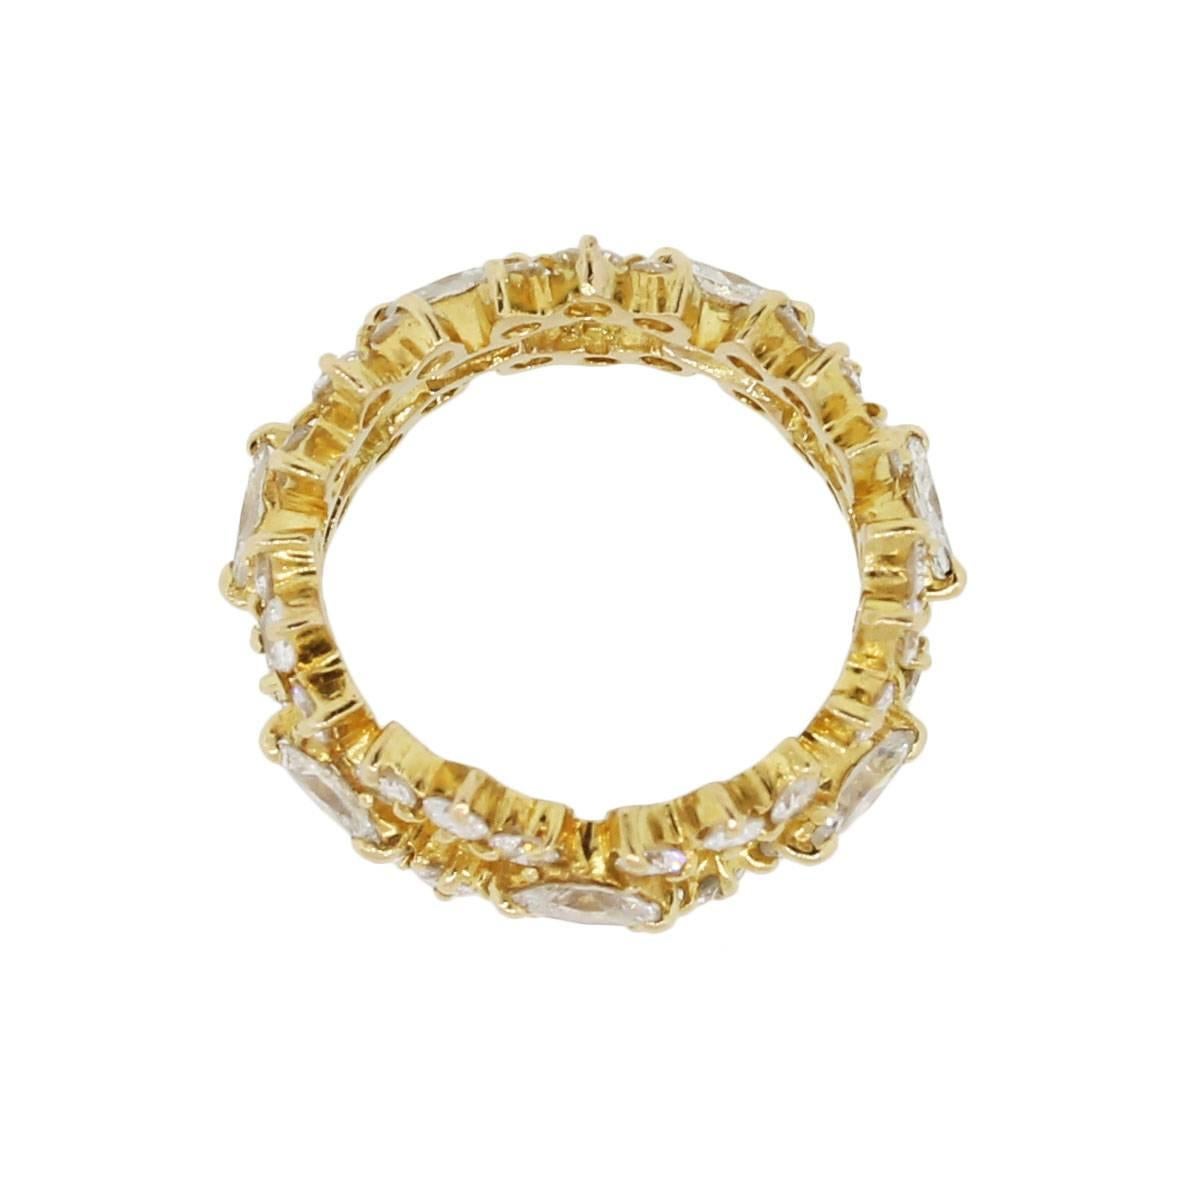 Material: 18k yellow gold
Diamond Details: Approximately 1.95ctw of round brilliant and marquise shape diamonds. Diamonds are G/H in color and VS in clarity
Size: 6.25
Total Weight: 6.4g (4.1dwt)
Measurements: 0.94″ x 0.40″ x 0.94″
Additional